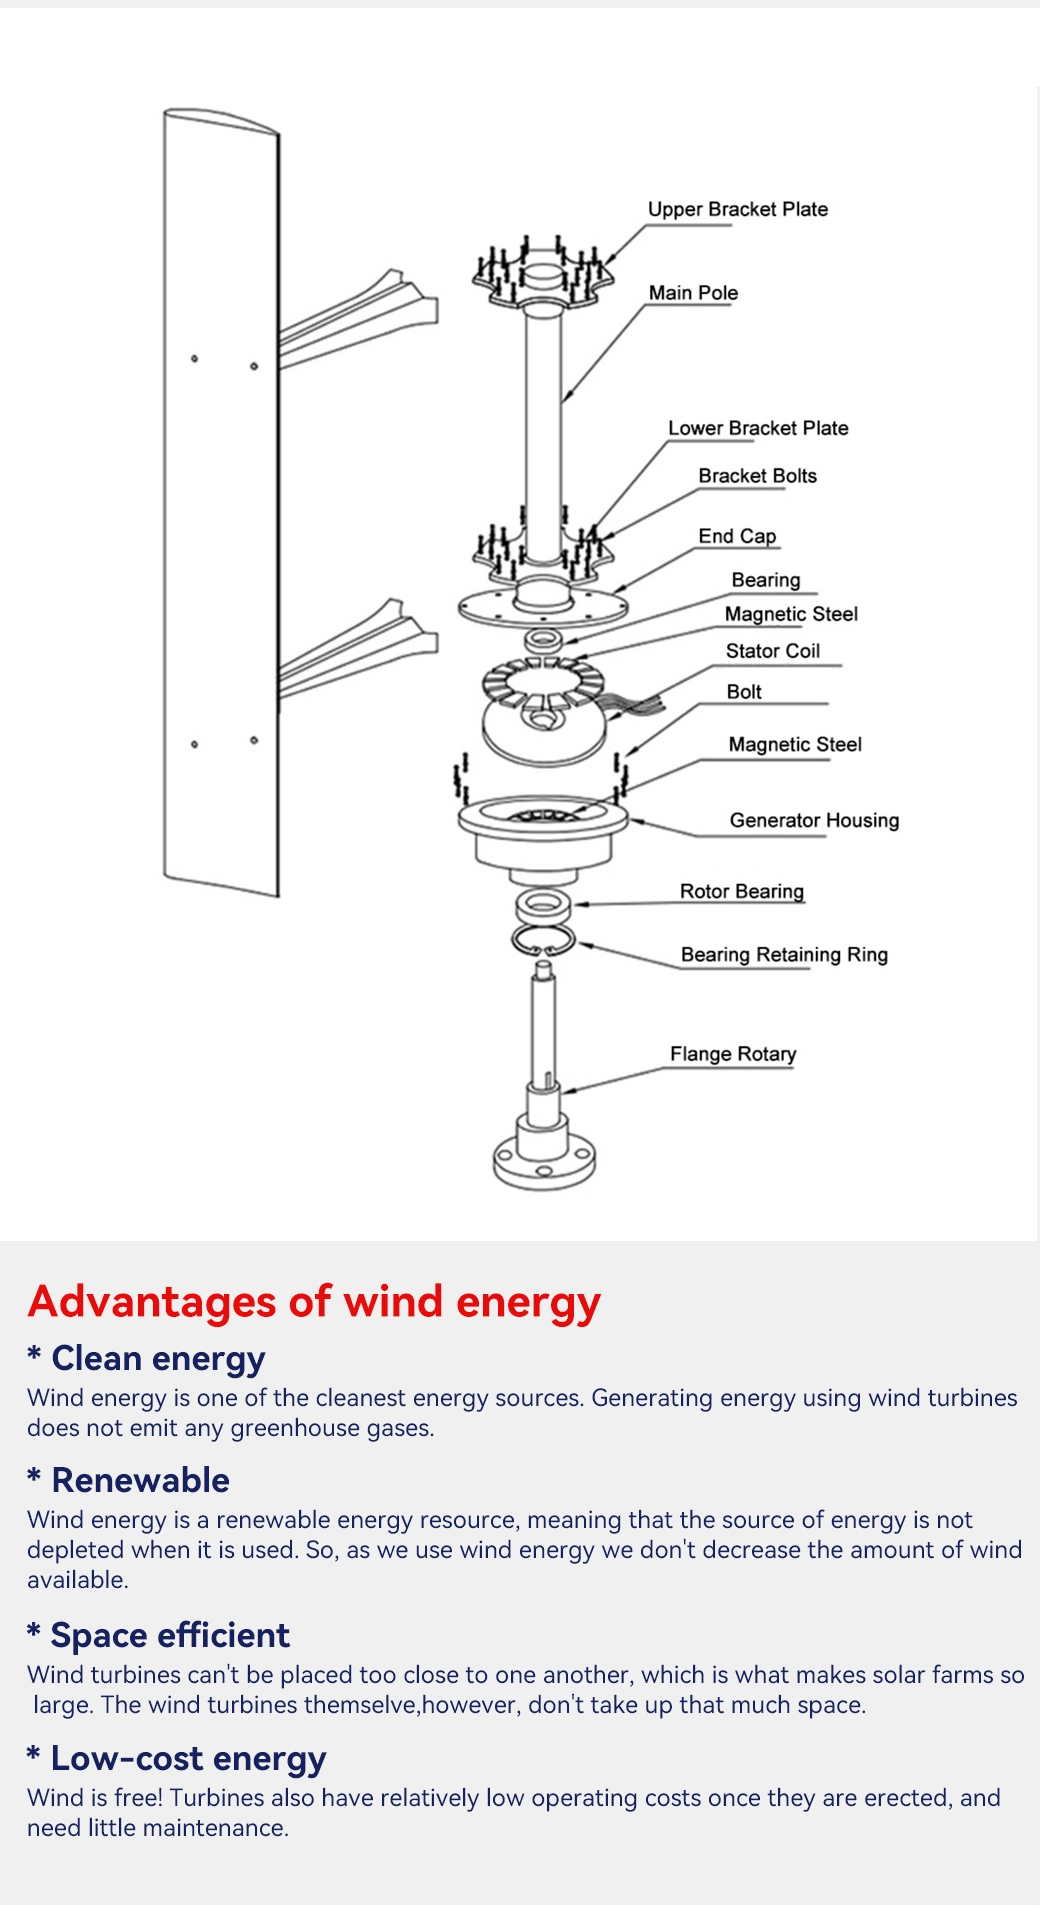 Factory Wholesale 10kw 5kw Vertical Wind Power Turbine to Generate Electricity Cheap Price for Sale